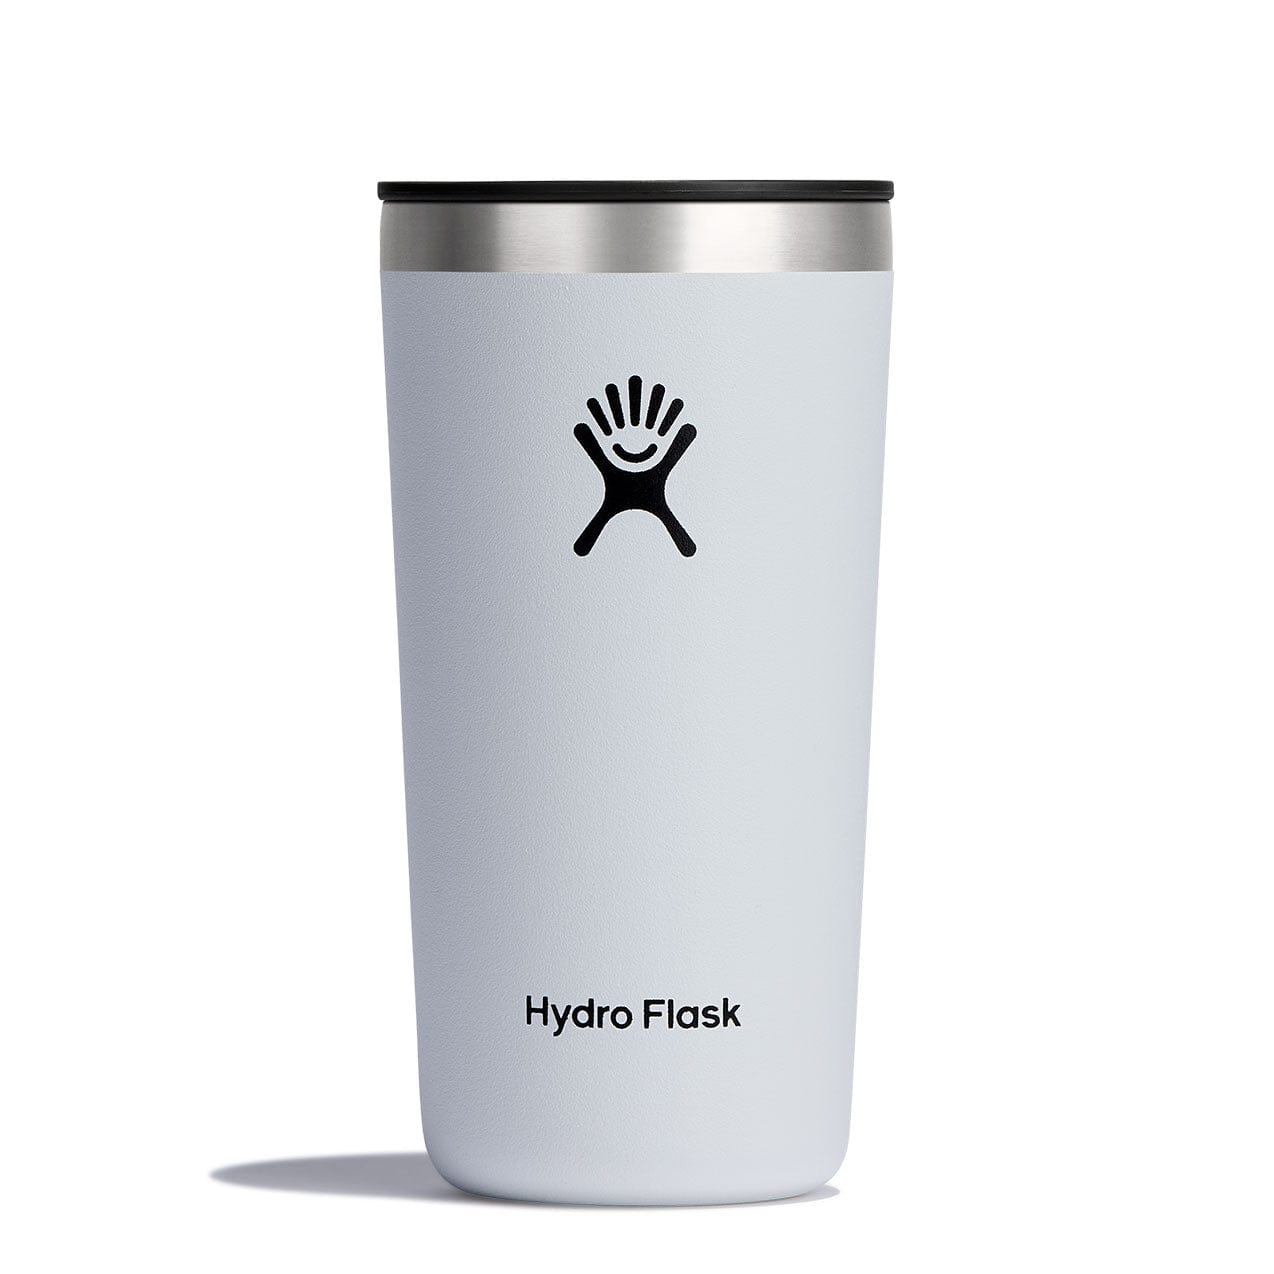 Hydro Flask Travel Tumblers are now at Campmor! Keep cool and